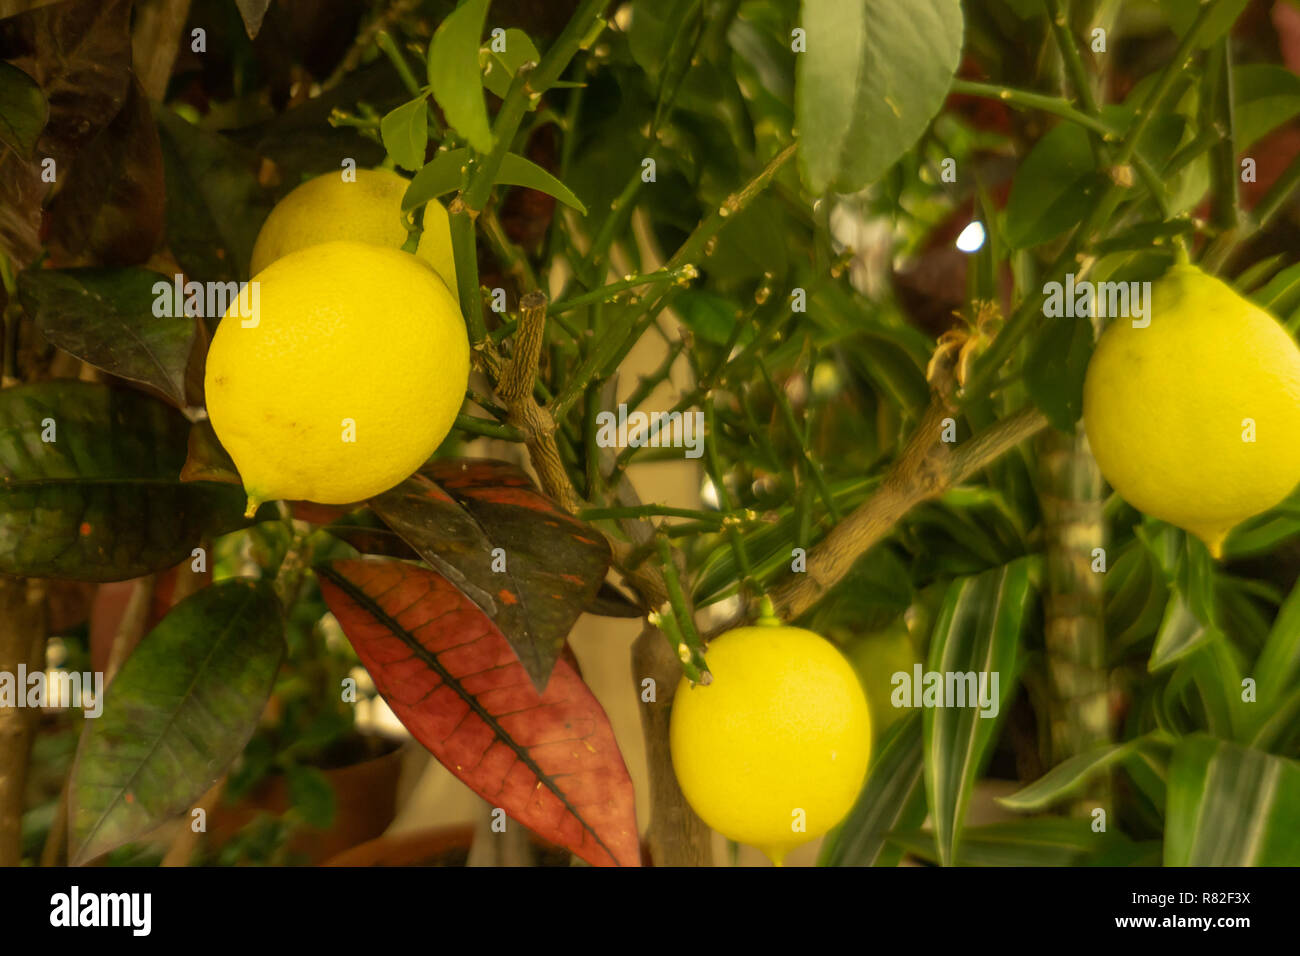 A large bright yellow lemon hanging on a branch with green leaves on a windowsill in the room Stock Photo